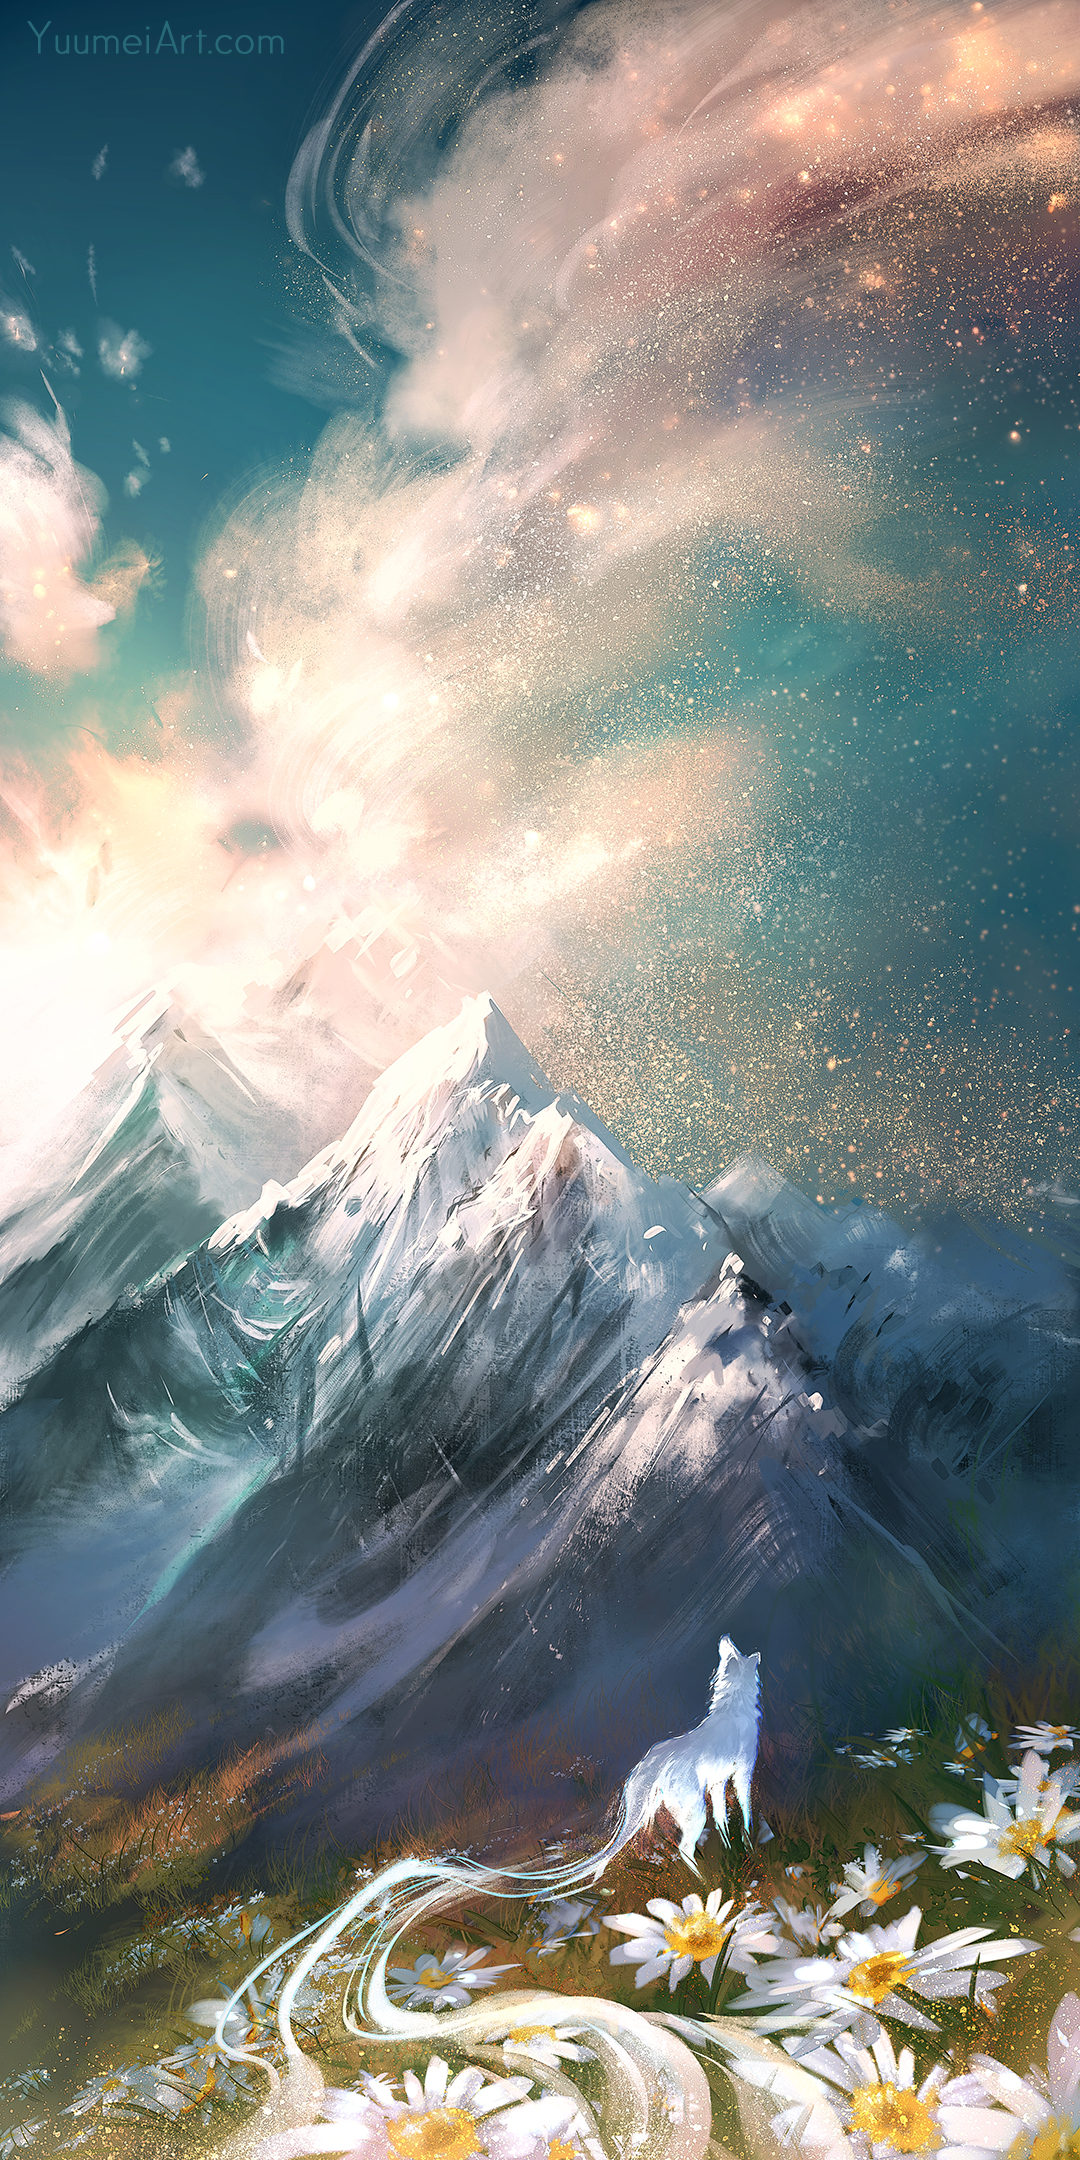 Fantasy wolf looking up past snow capped mountains by Yuumei